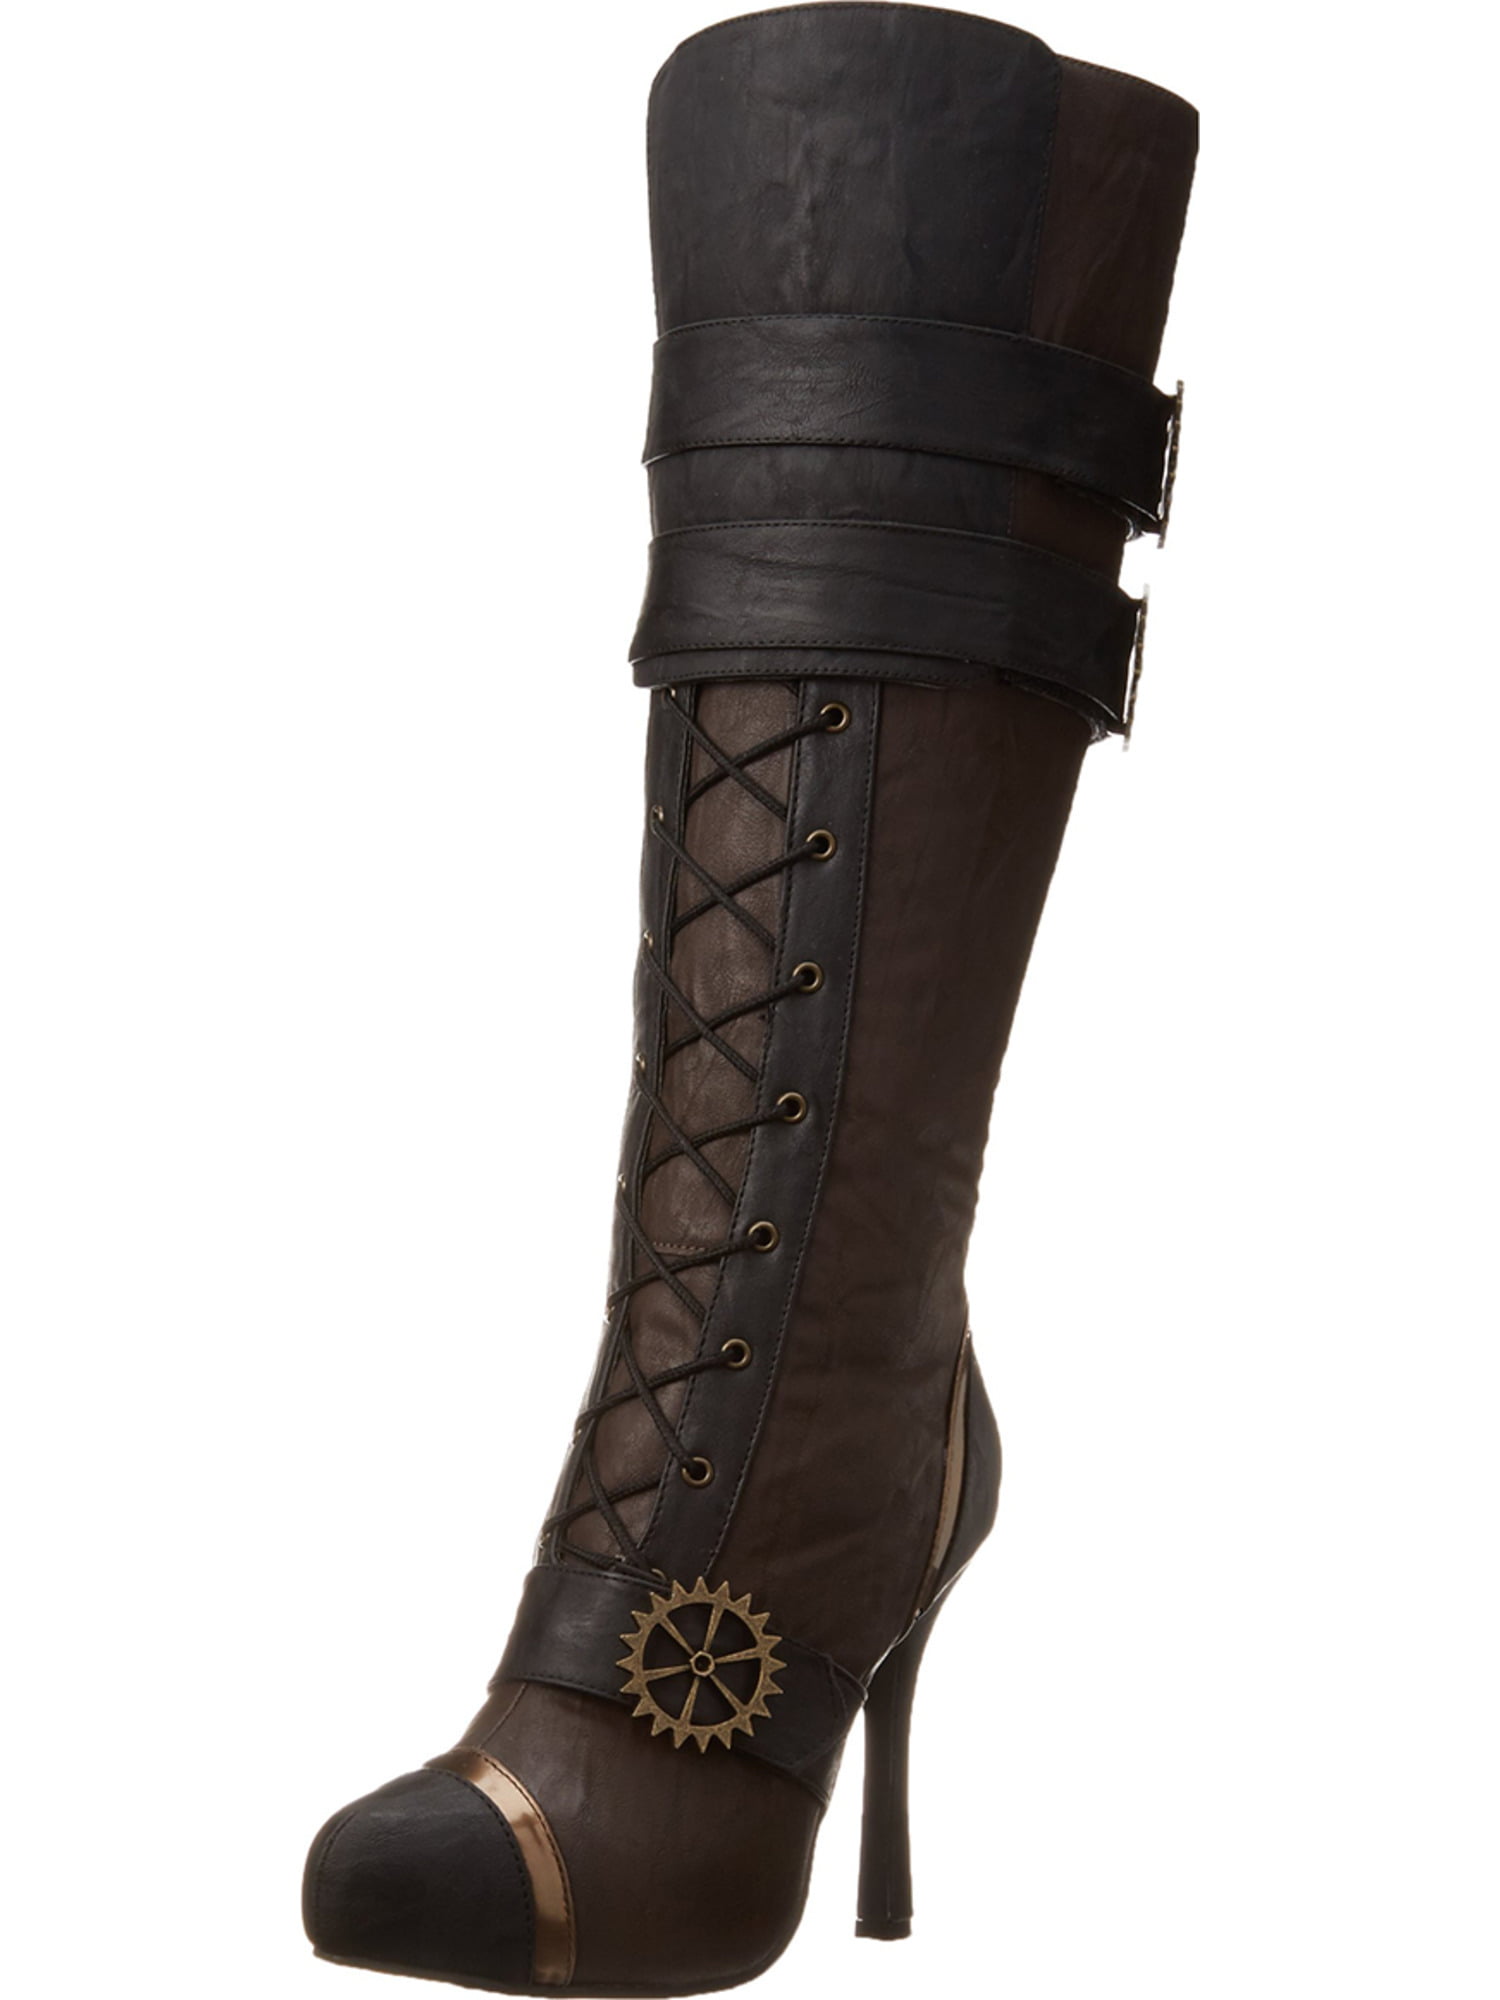 steampunk lace up boots